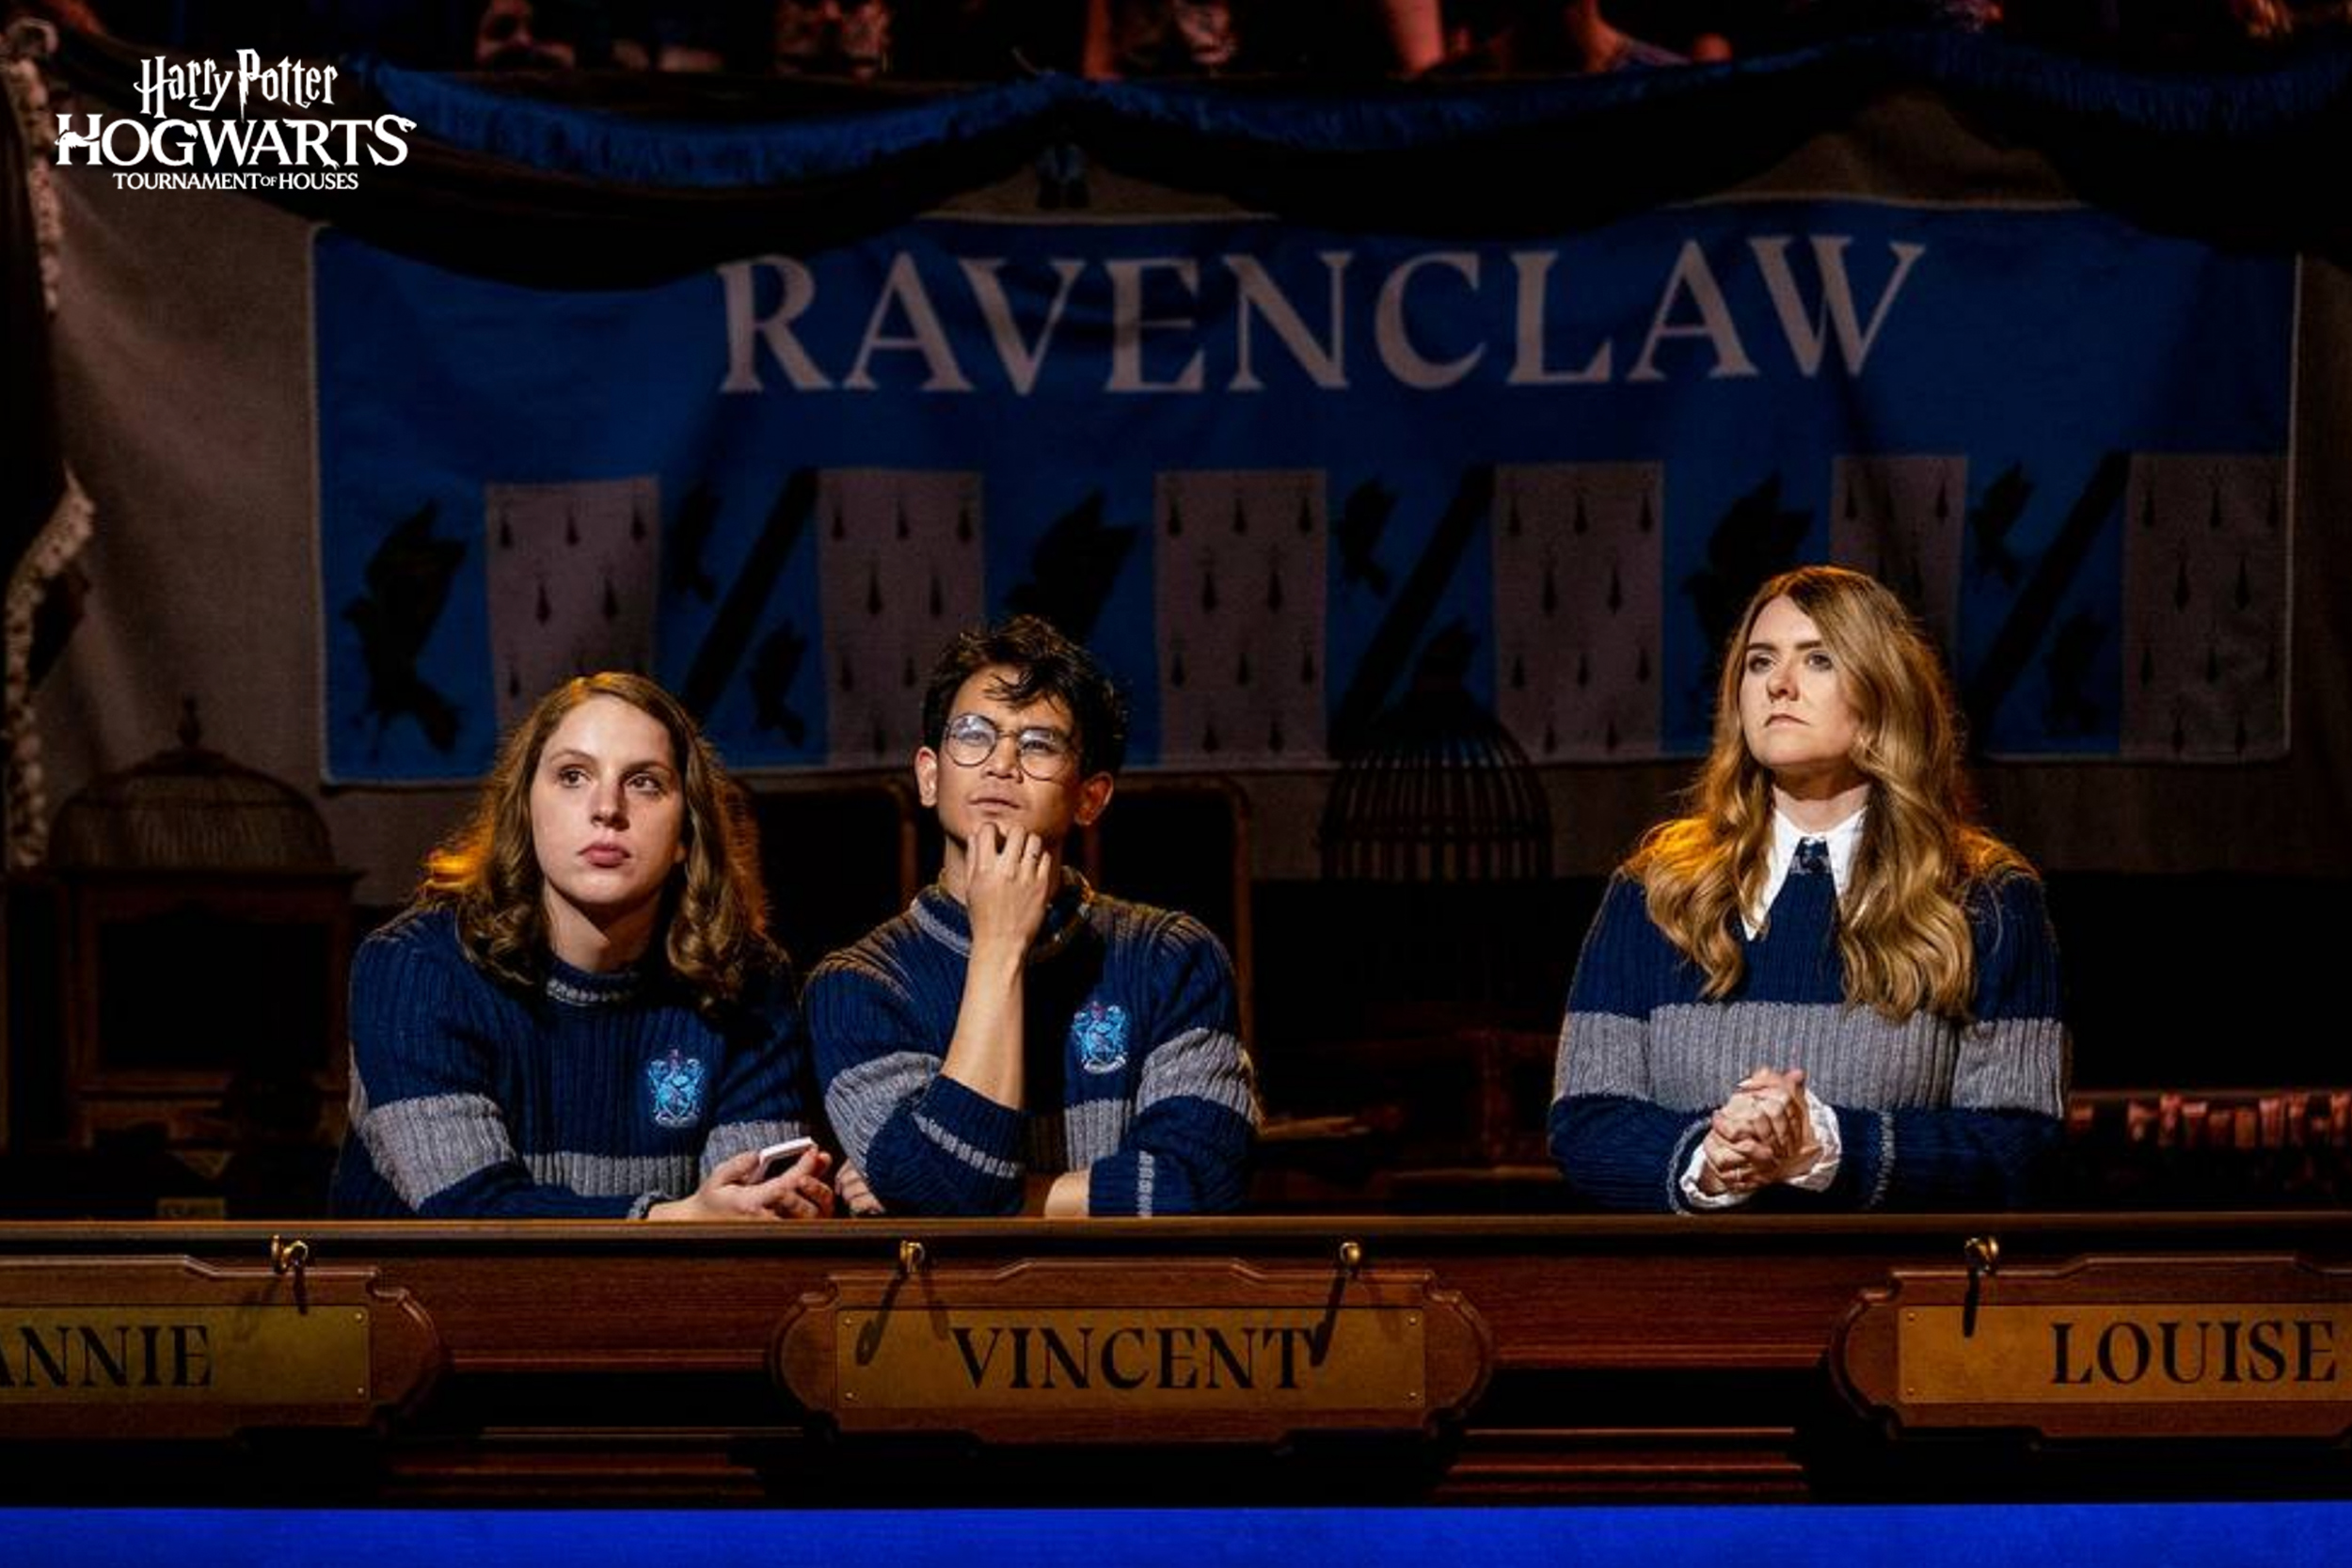 Watch Harry Potter: Hogwarts Tournament of Houses, TV Shows